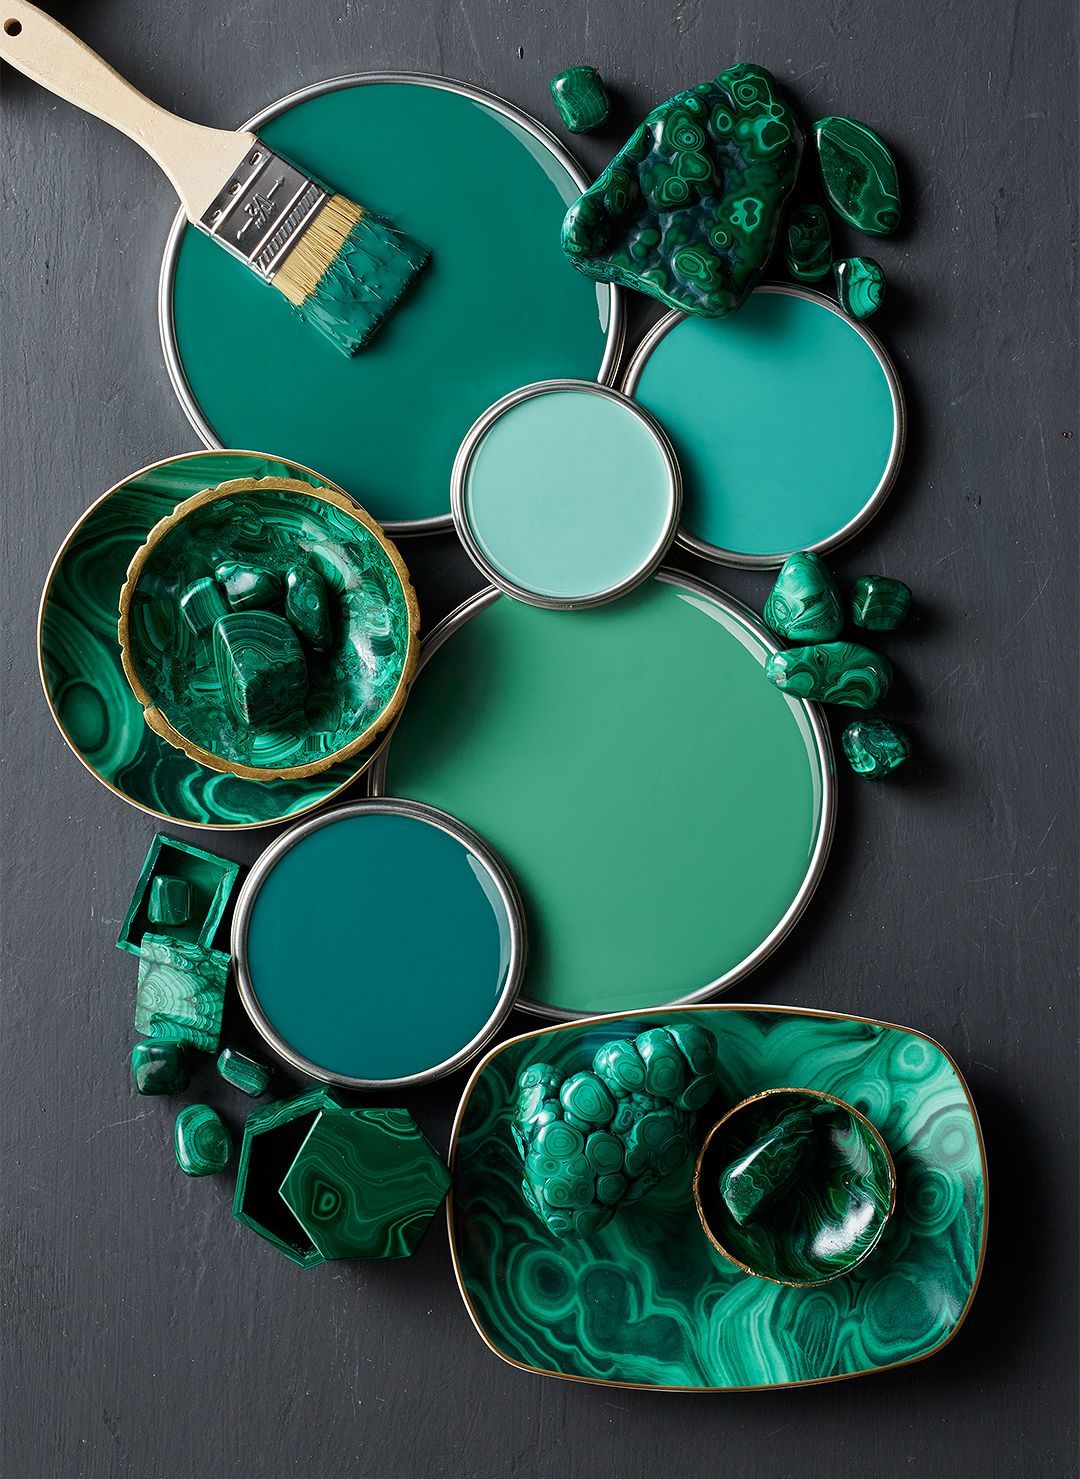 Green Paint Colors Our Editors Swear By -   14 room decor Green cabinet colors ideas